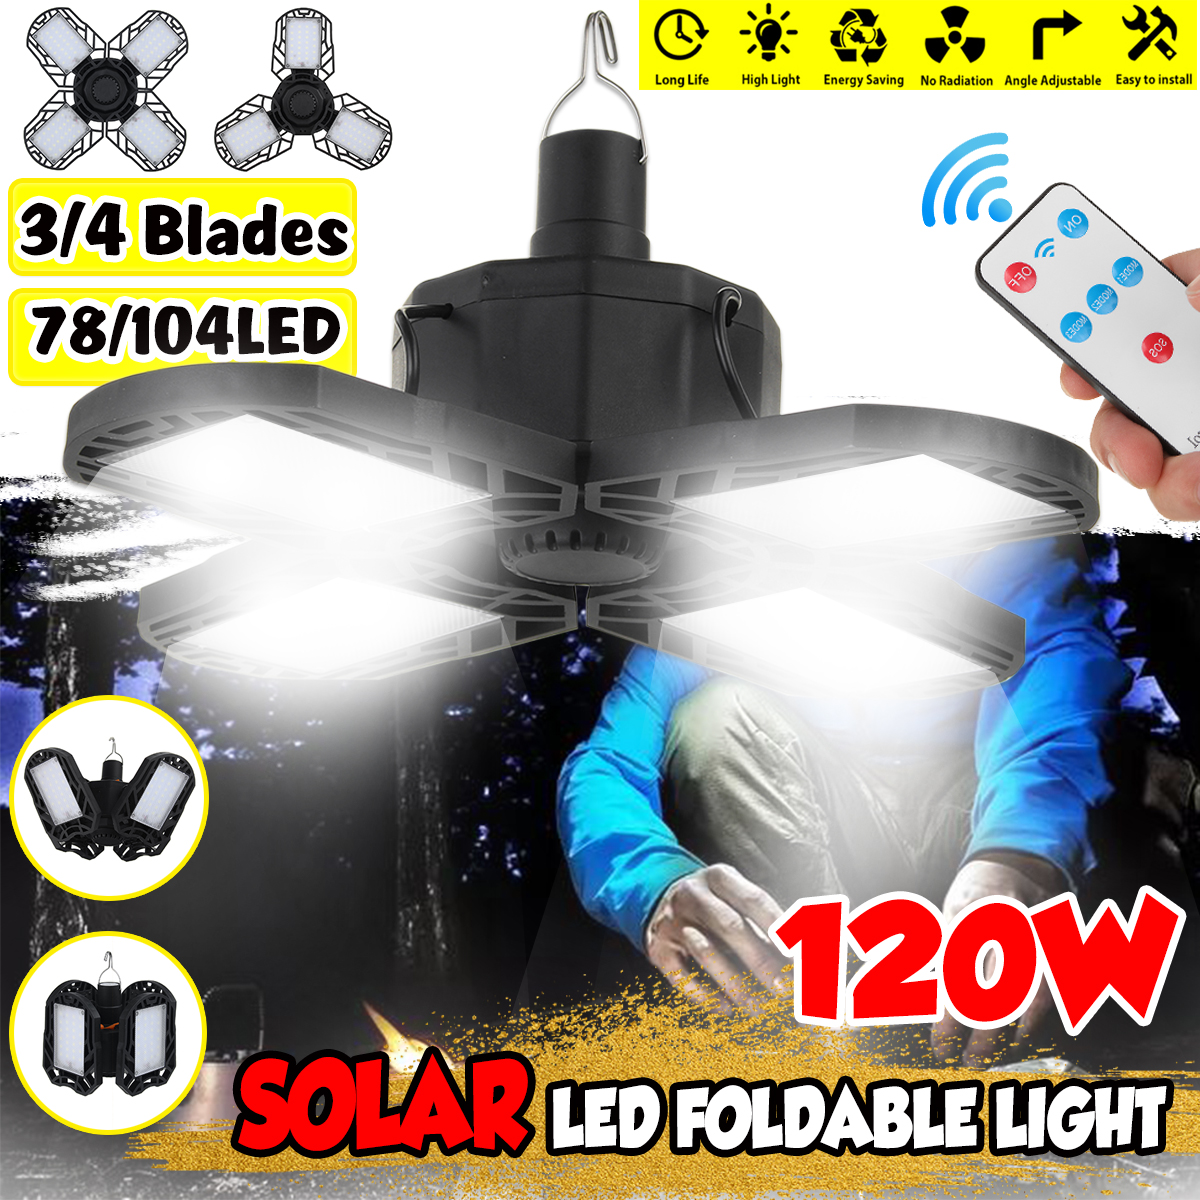 120W-Remote-Control-Solar-Camping-Light-5-Modes-USB-Charging-Waterproof-LED-Light-Outdoor-Foldable-E-1755004-2